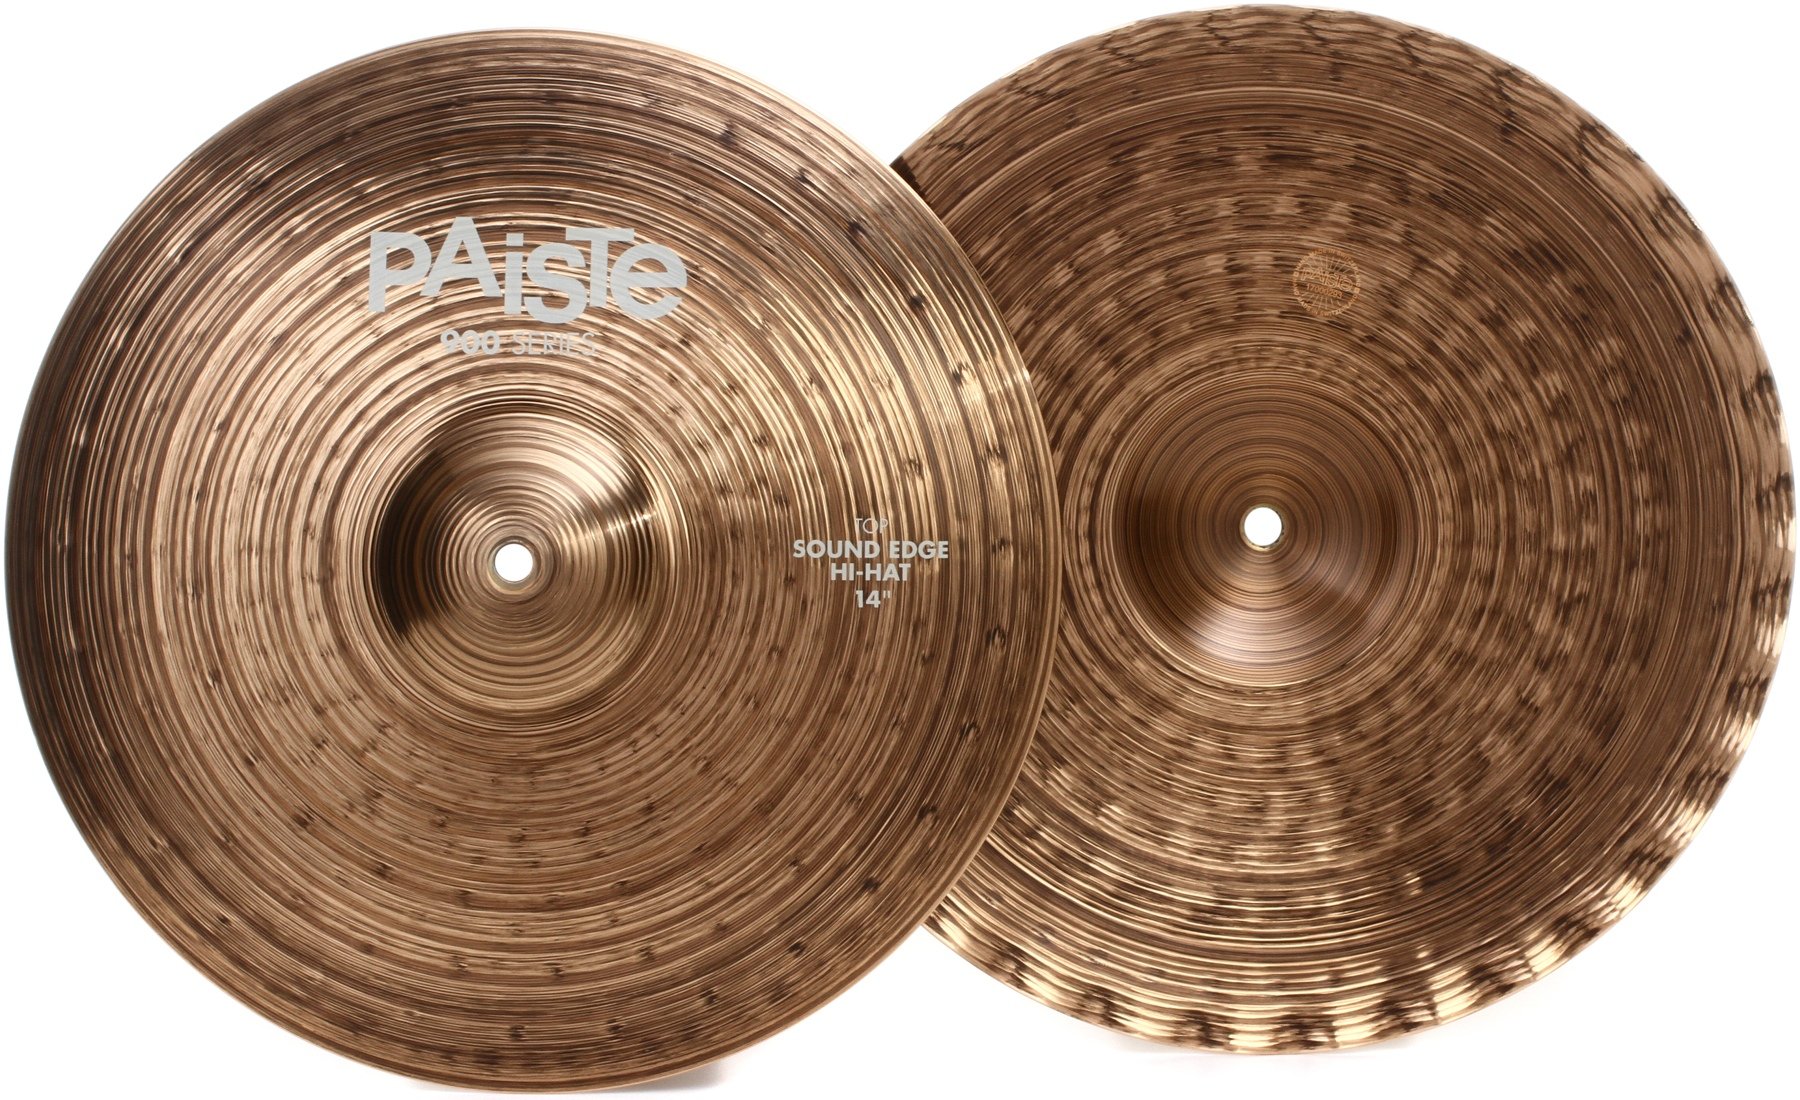 Paiste 14 inch 900 Series Sound Edge Hi-hat Cymbals | Sweetwater